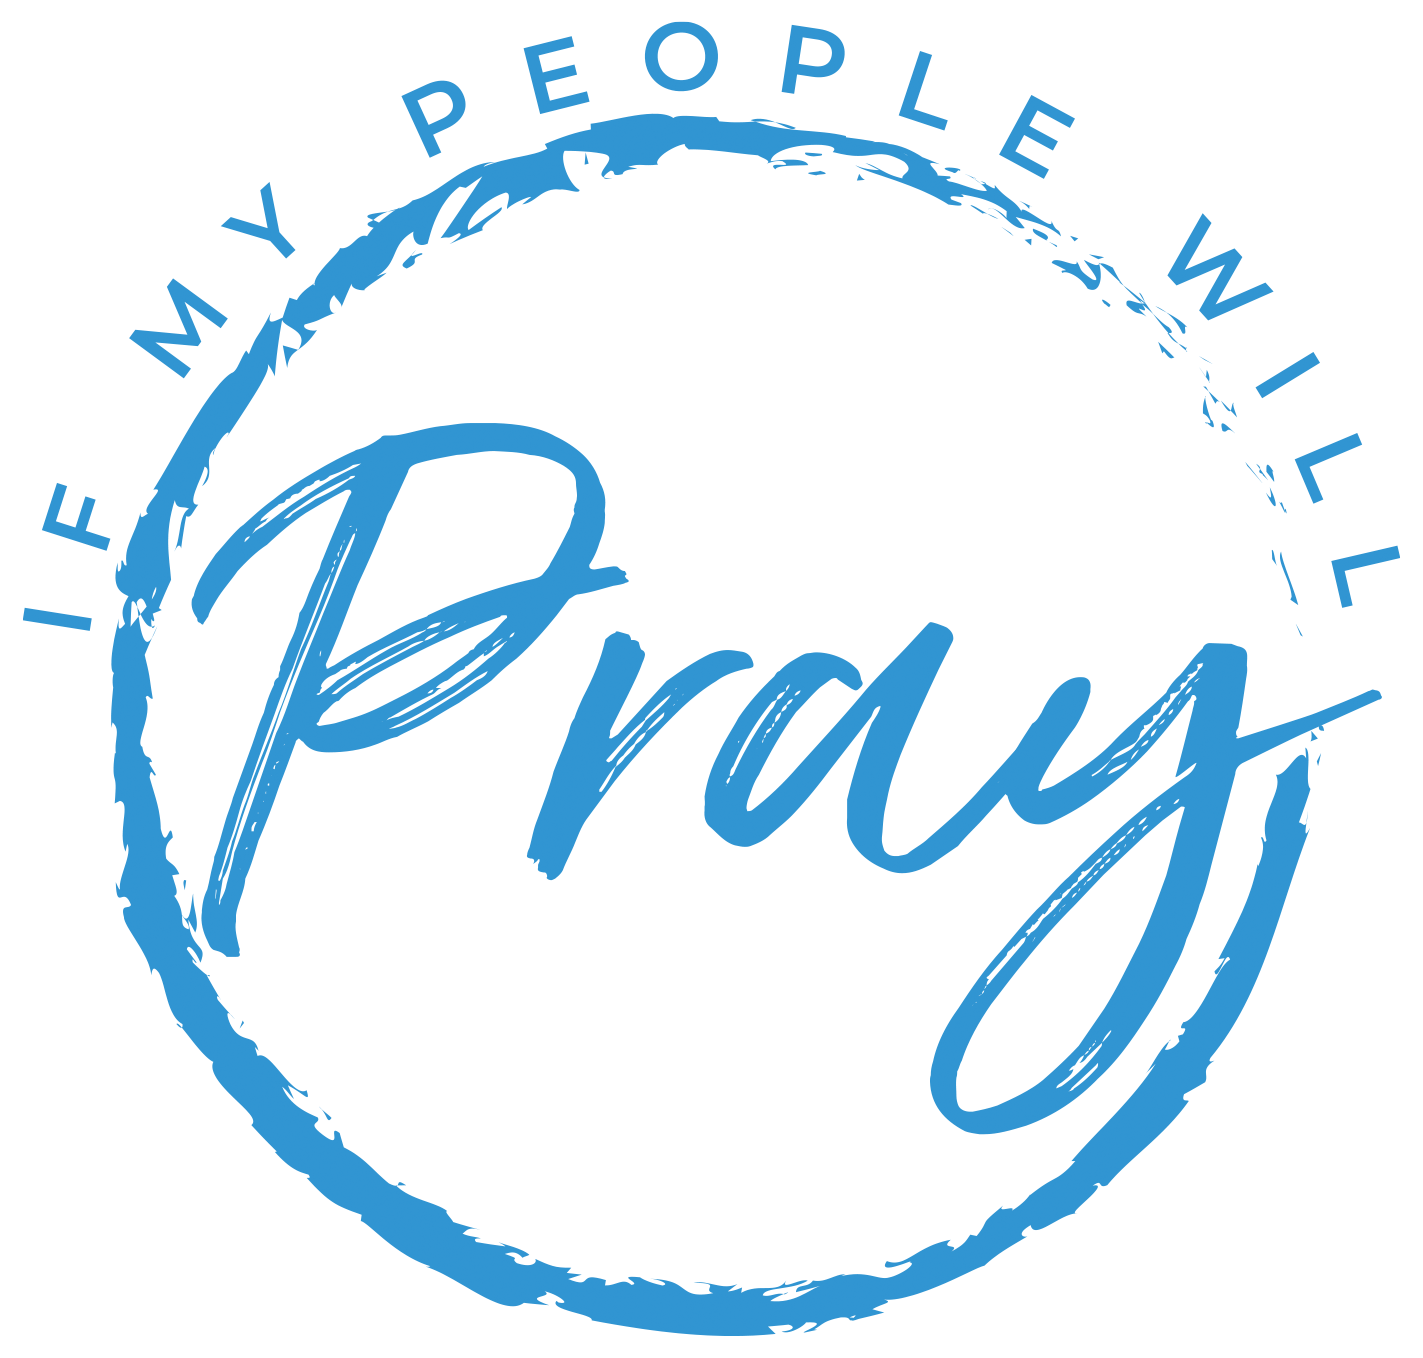 if_my_people_will_pray_logo_design_revision (1)